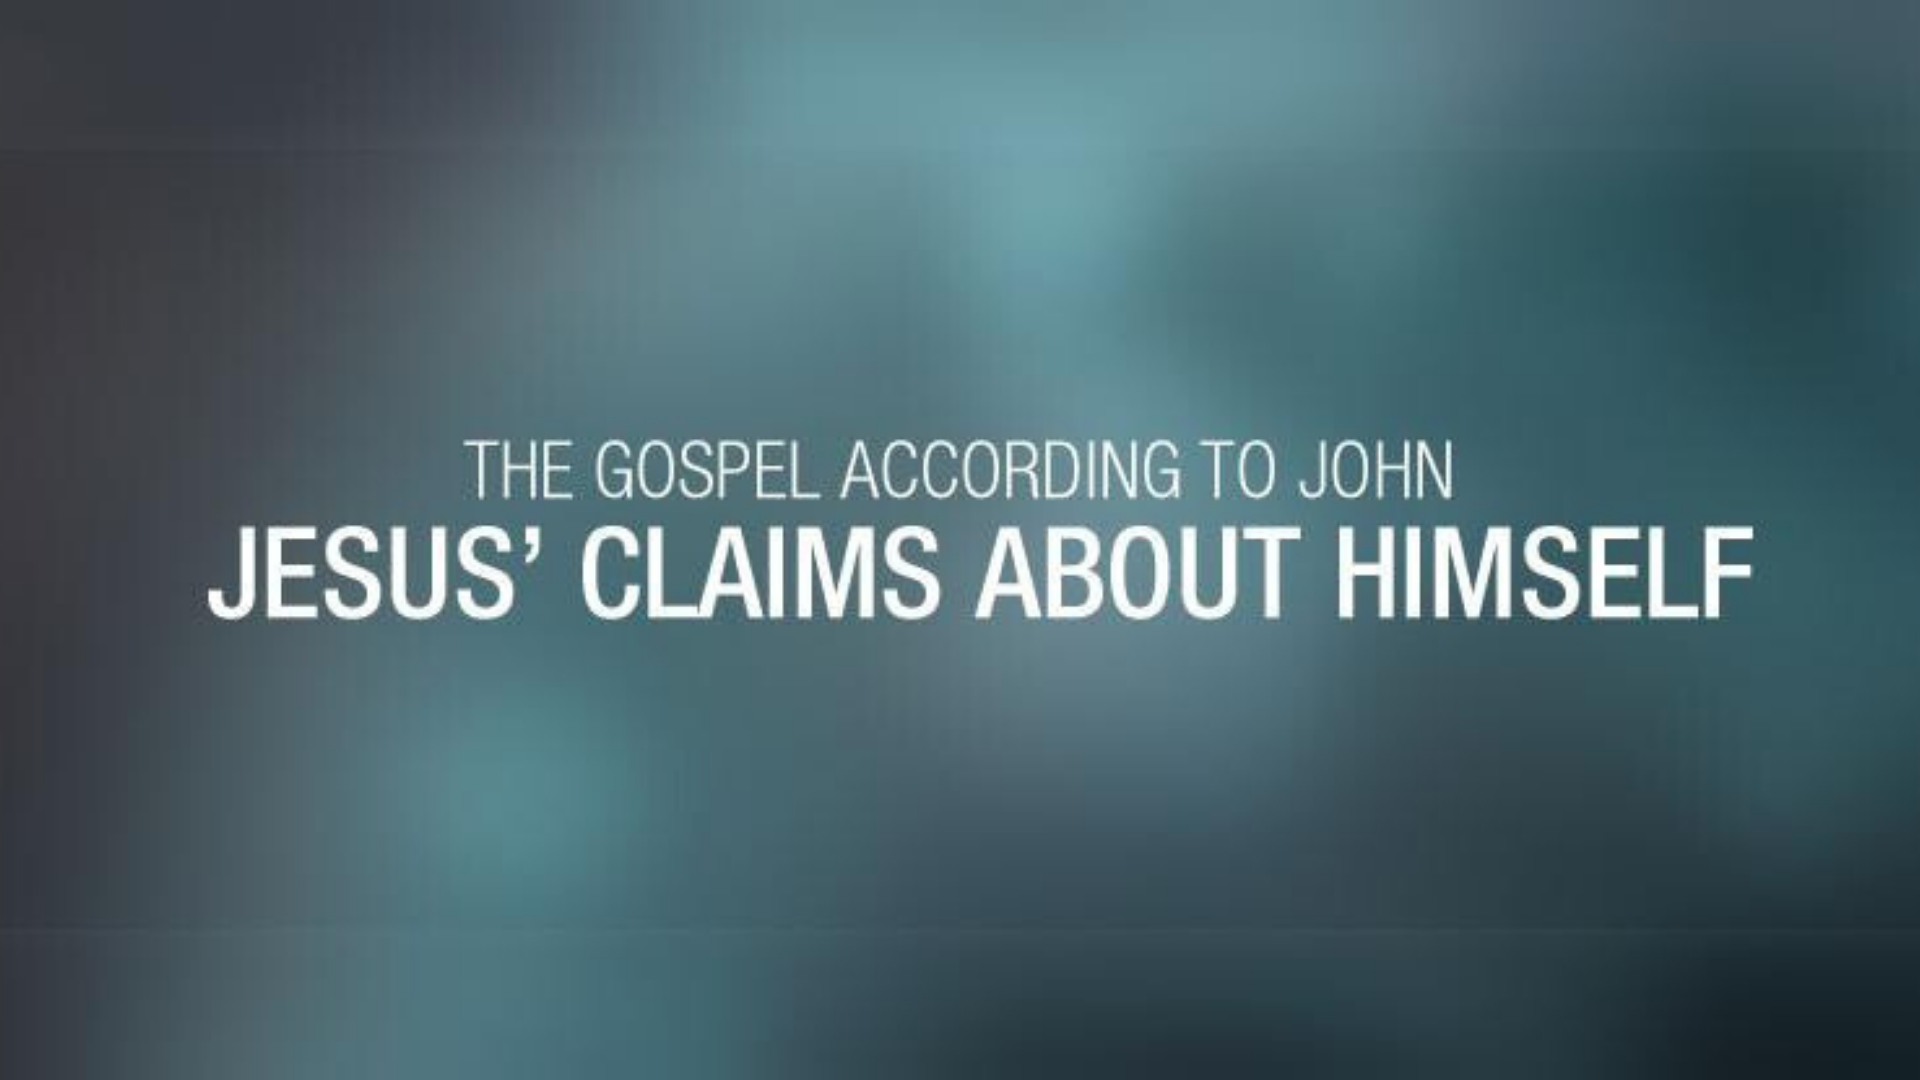 The Gospel According to John: Jesus' Claims About Himself